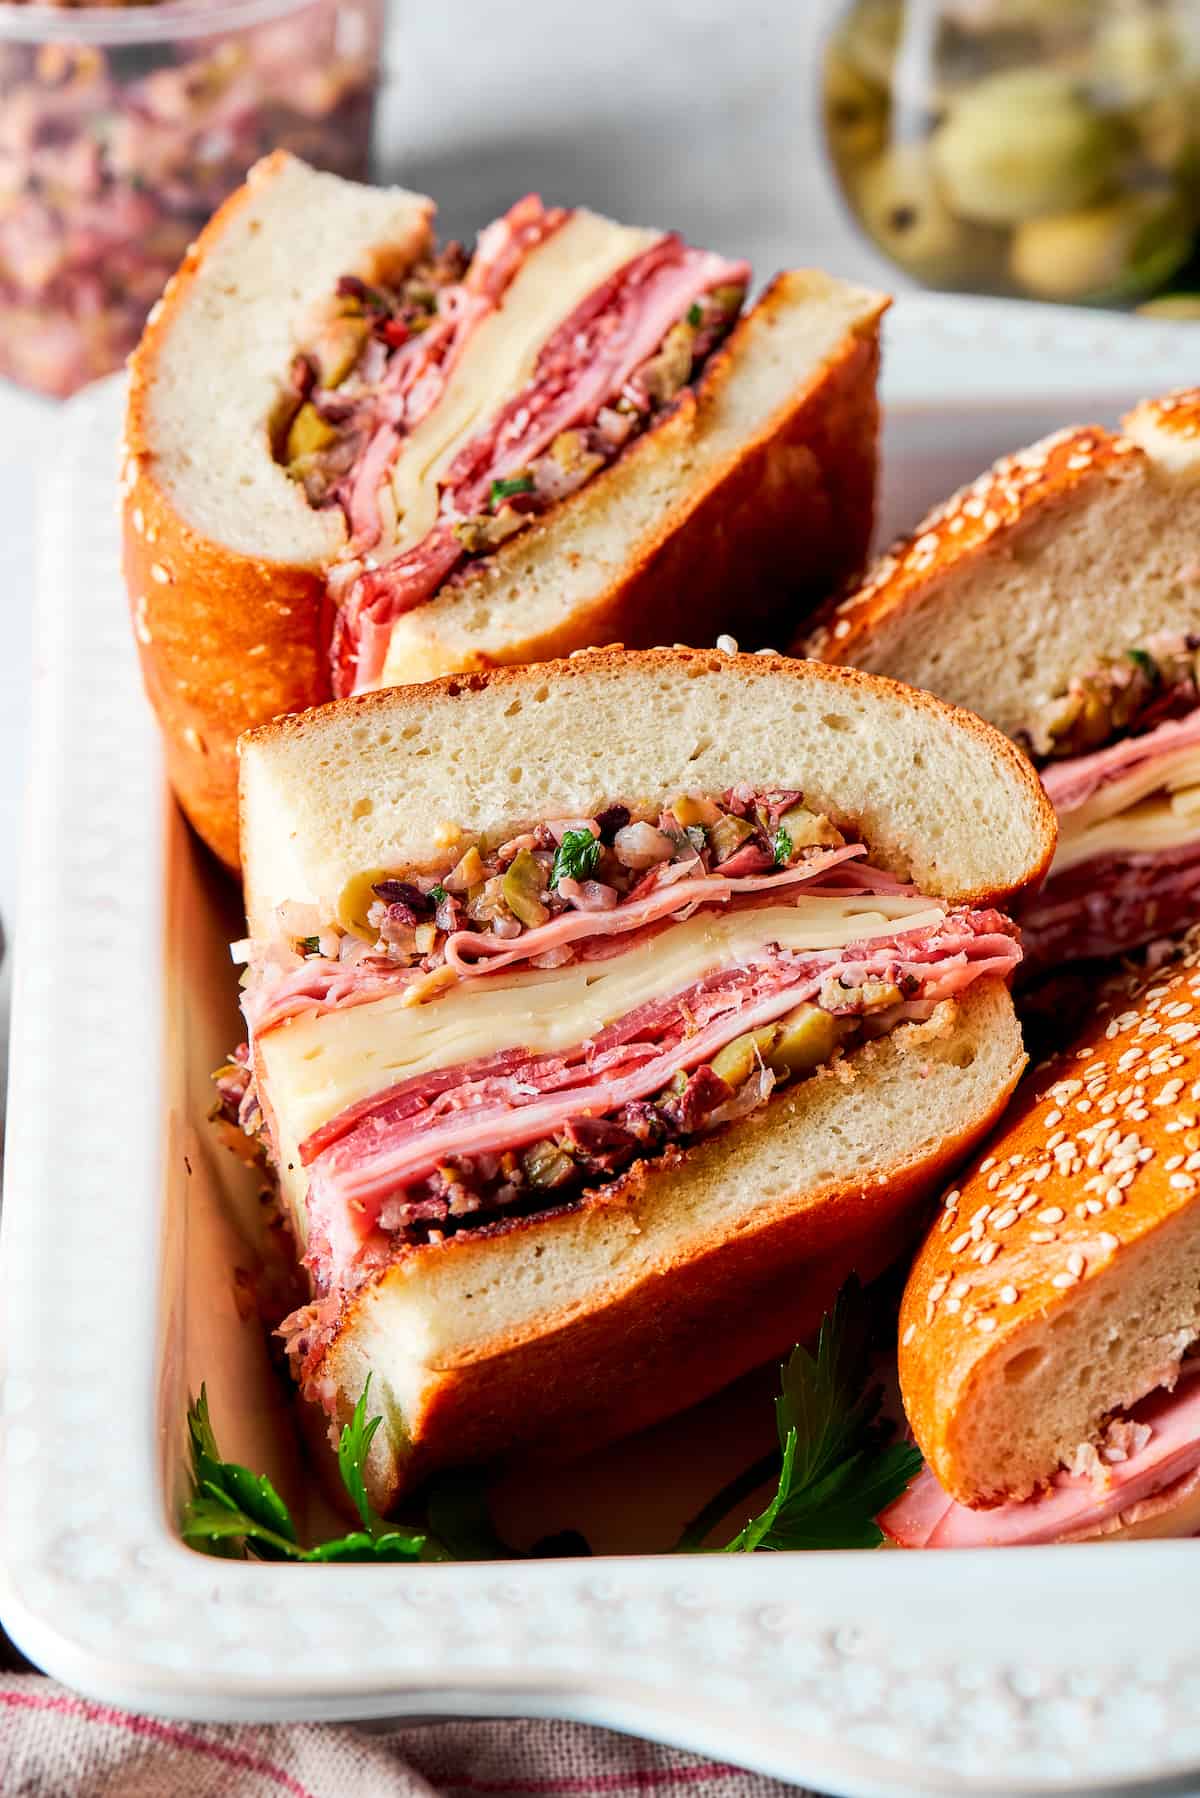 Pieces of muffaletta sandwich are shown on their sides with meat and cheese visible.